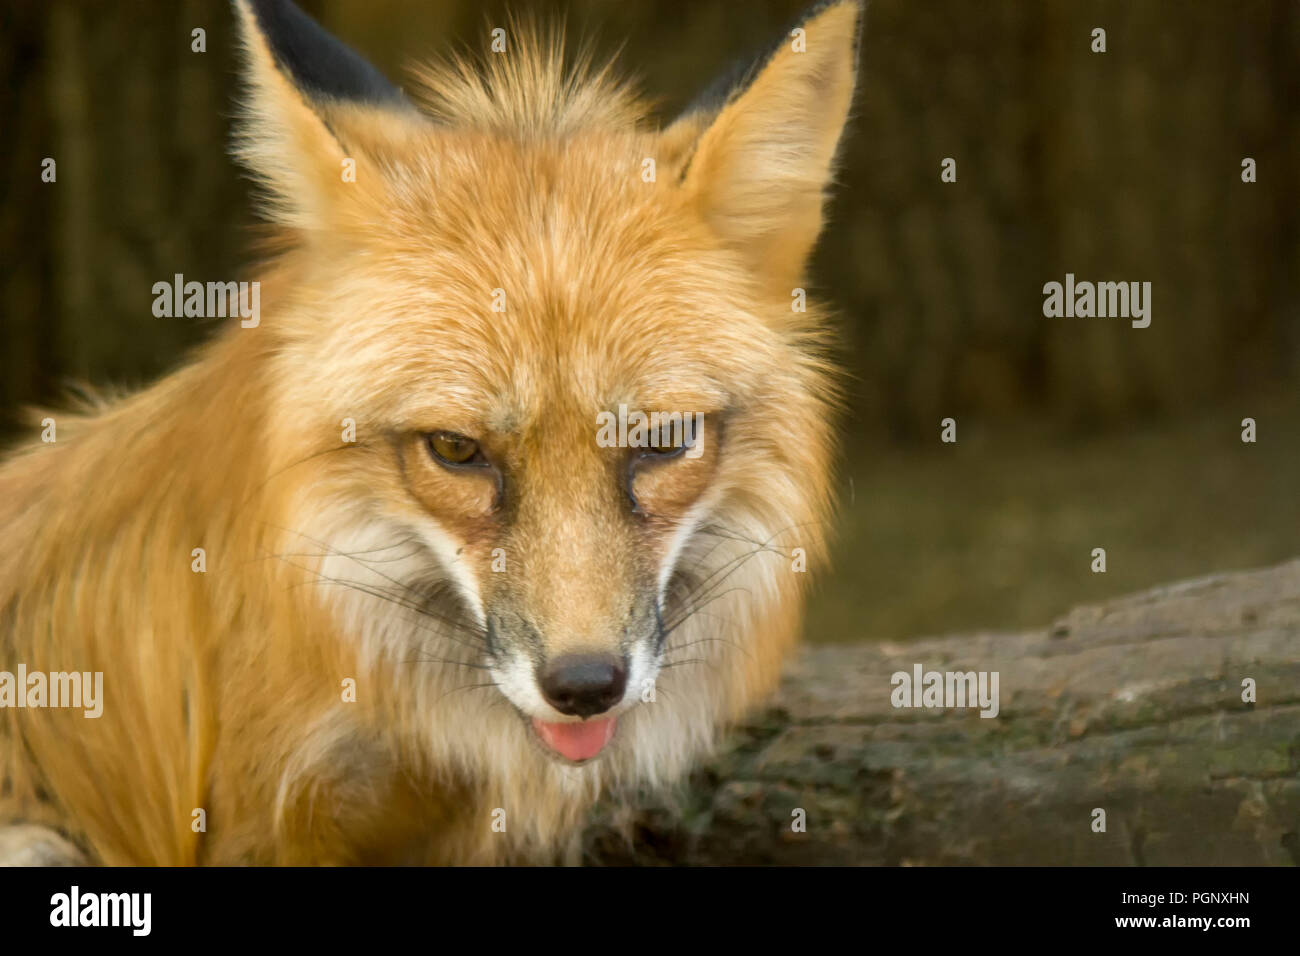 Fox close-up portrait. Foxes are small-to-medium-sized, omnivorous mammals belonging to several genera of the family Canidae. Foxes have a flattened s Stock Photo